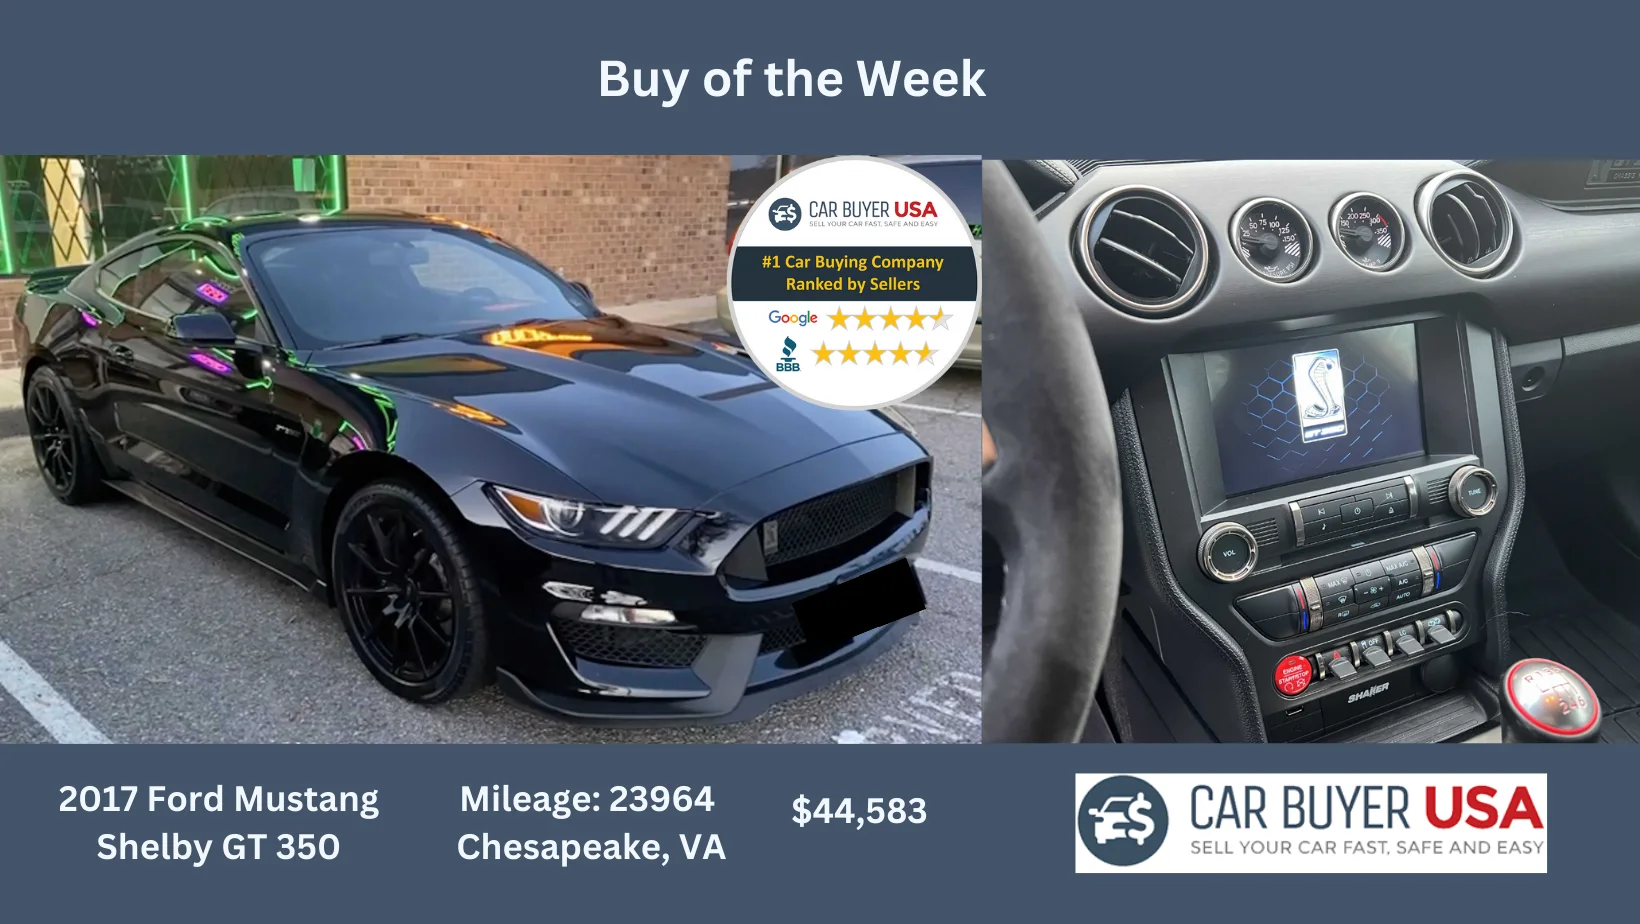 CarBuyerUSA - 2017 Ford Mustang Shelby GT350 - $44,583